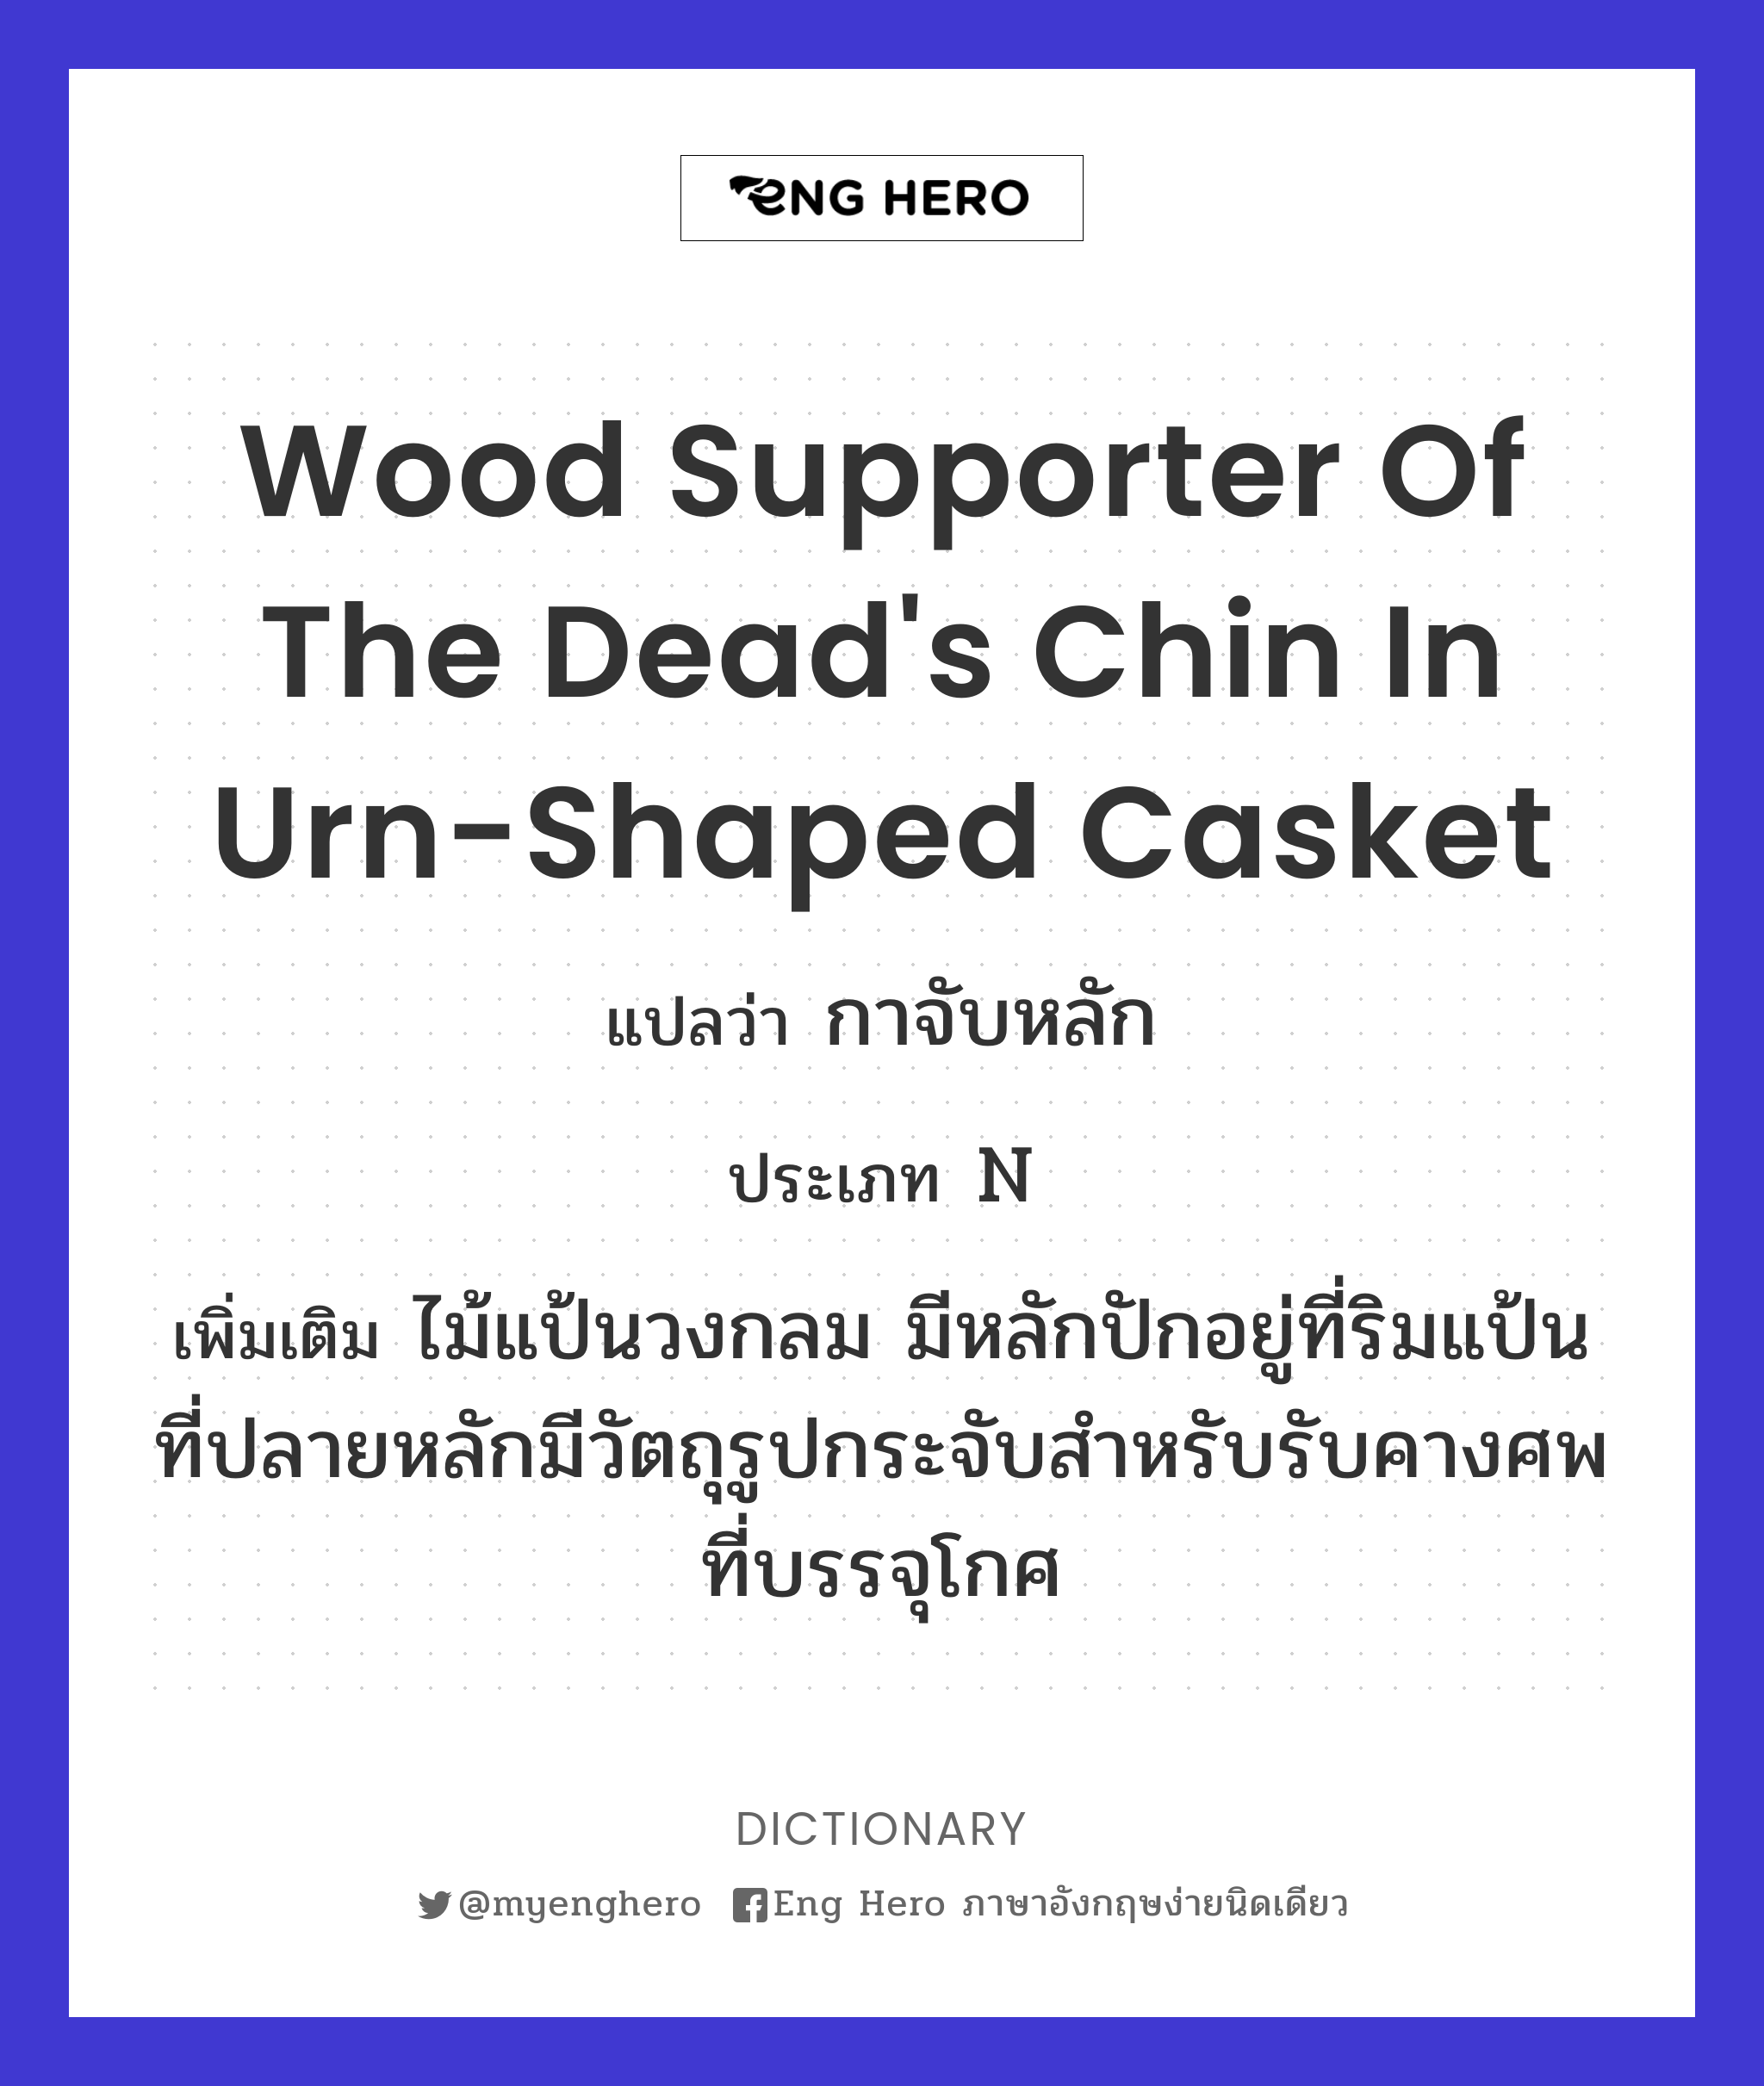 wood supporter of the dead's chin in urn-shaped casket